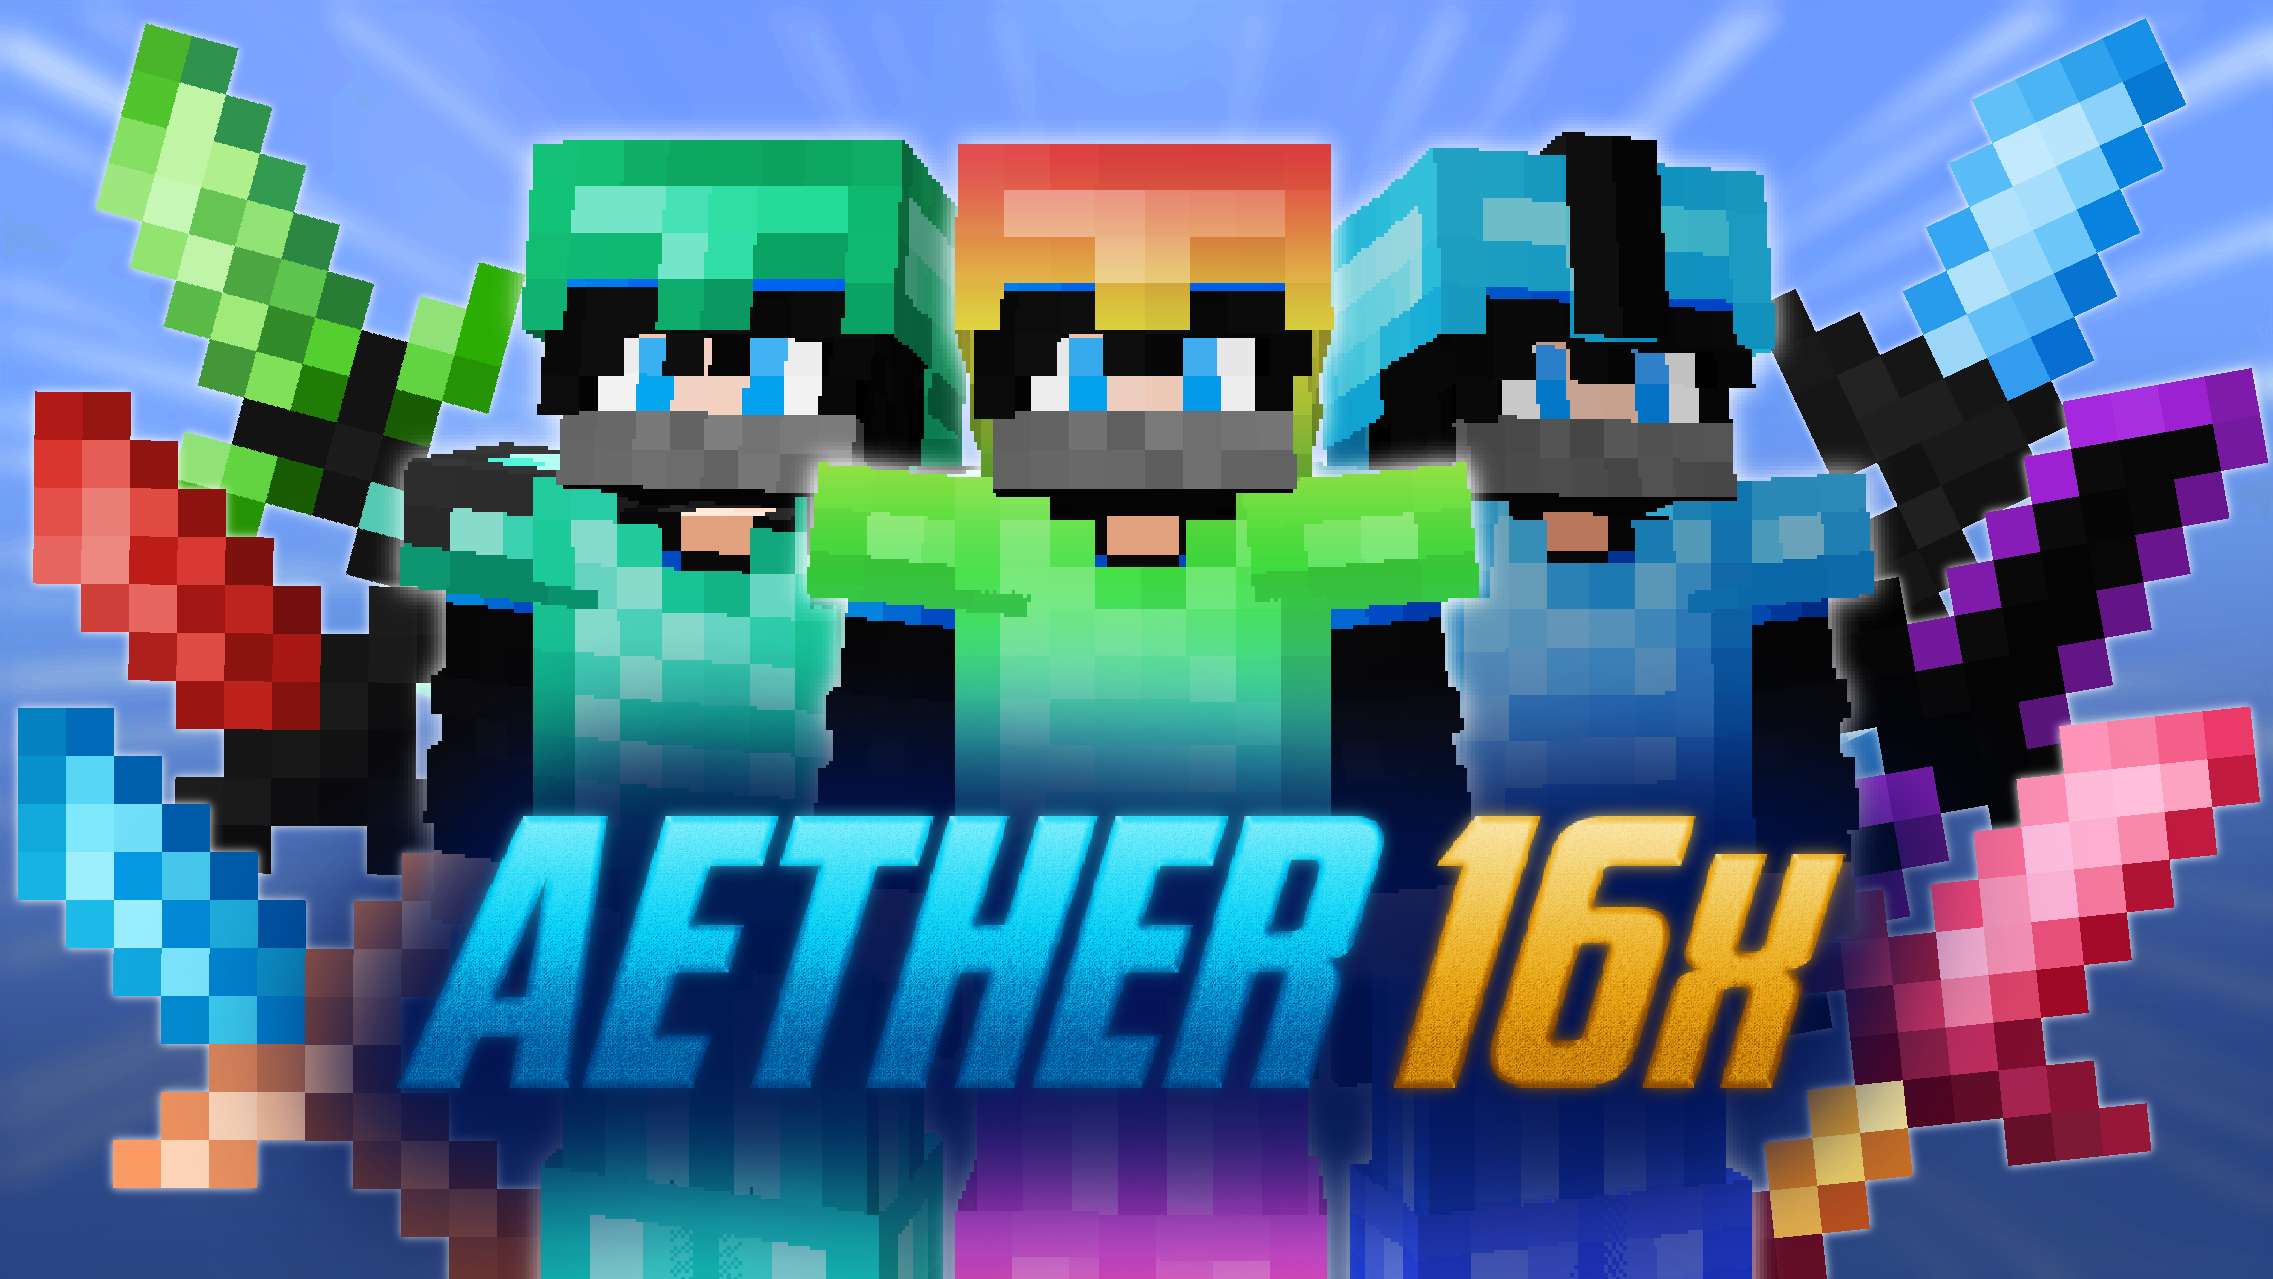 Aether 16x [Zuhiy] 16x by Mqryo on PvPRP